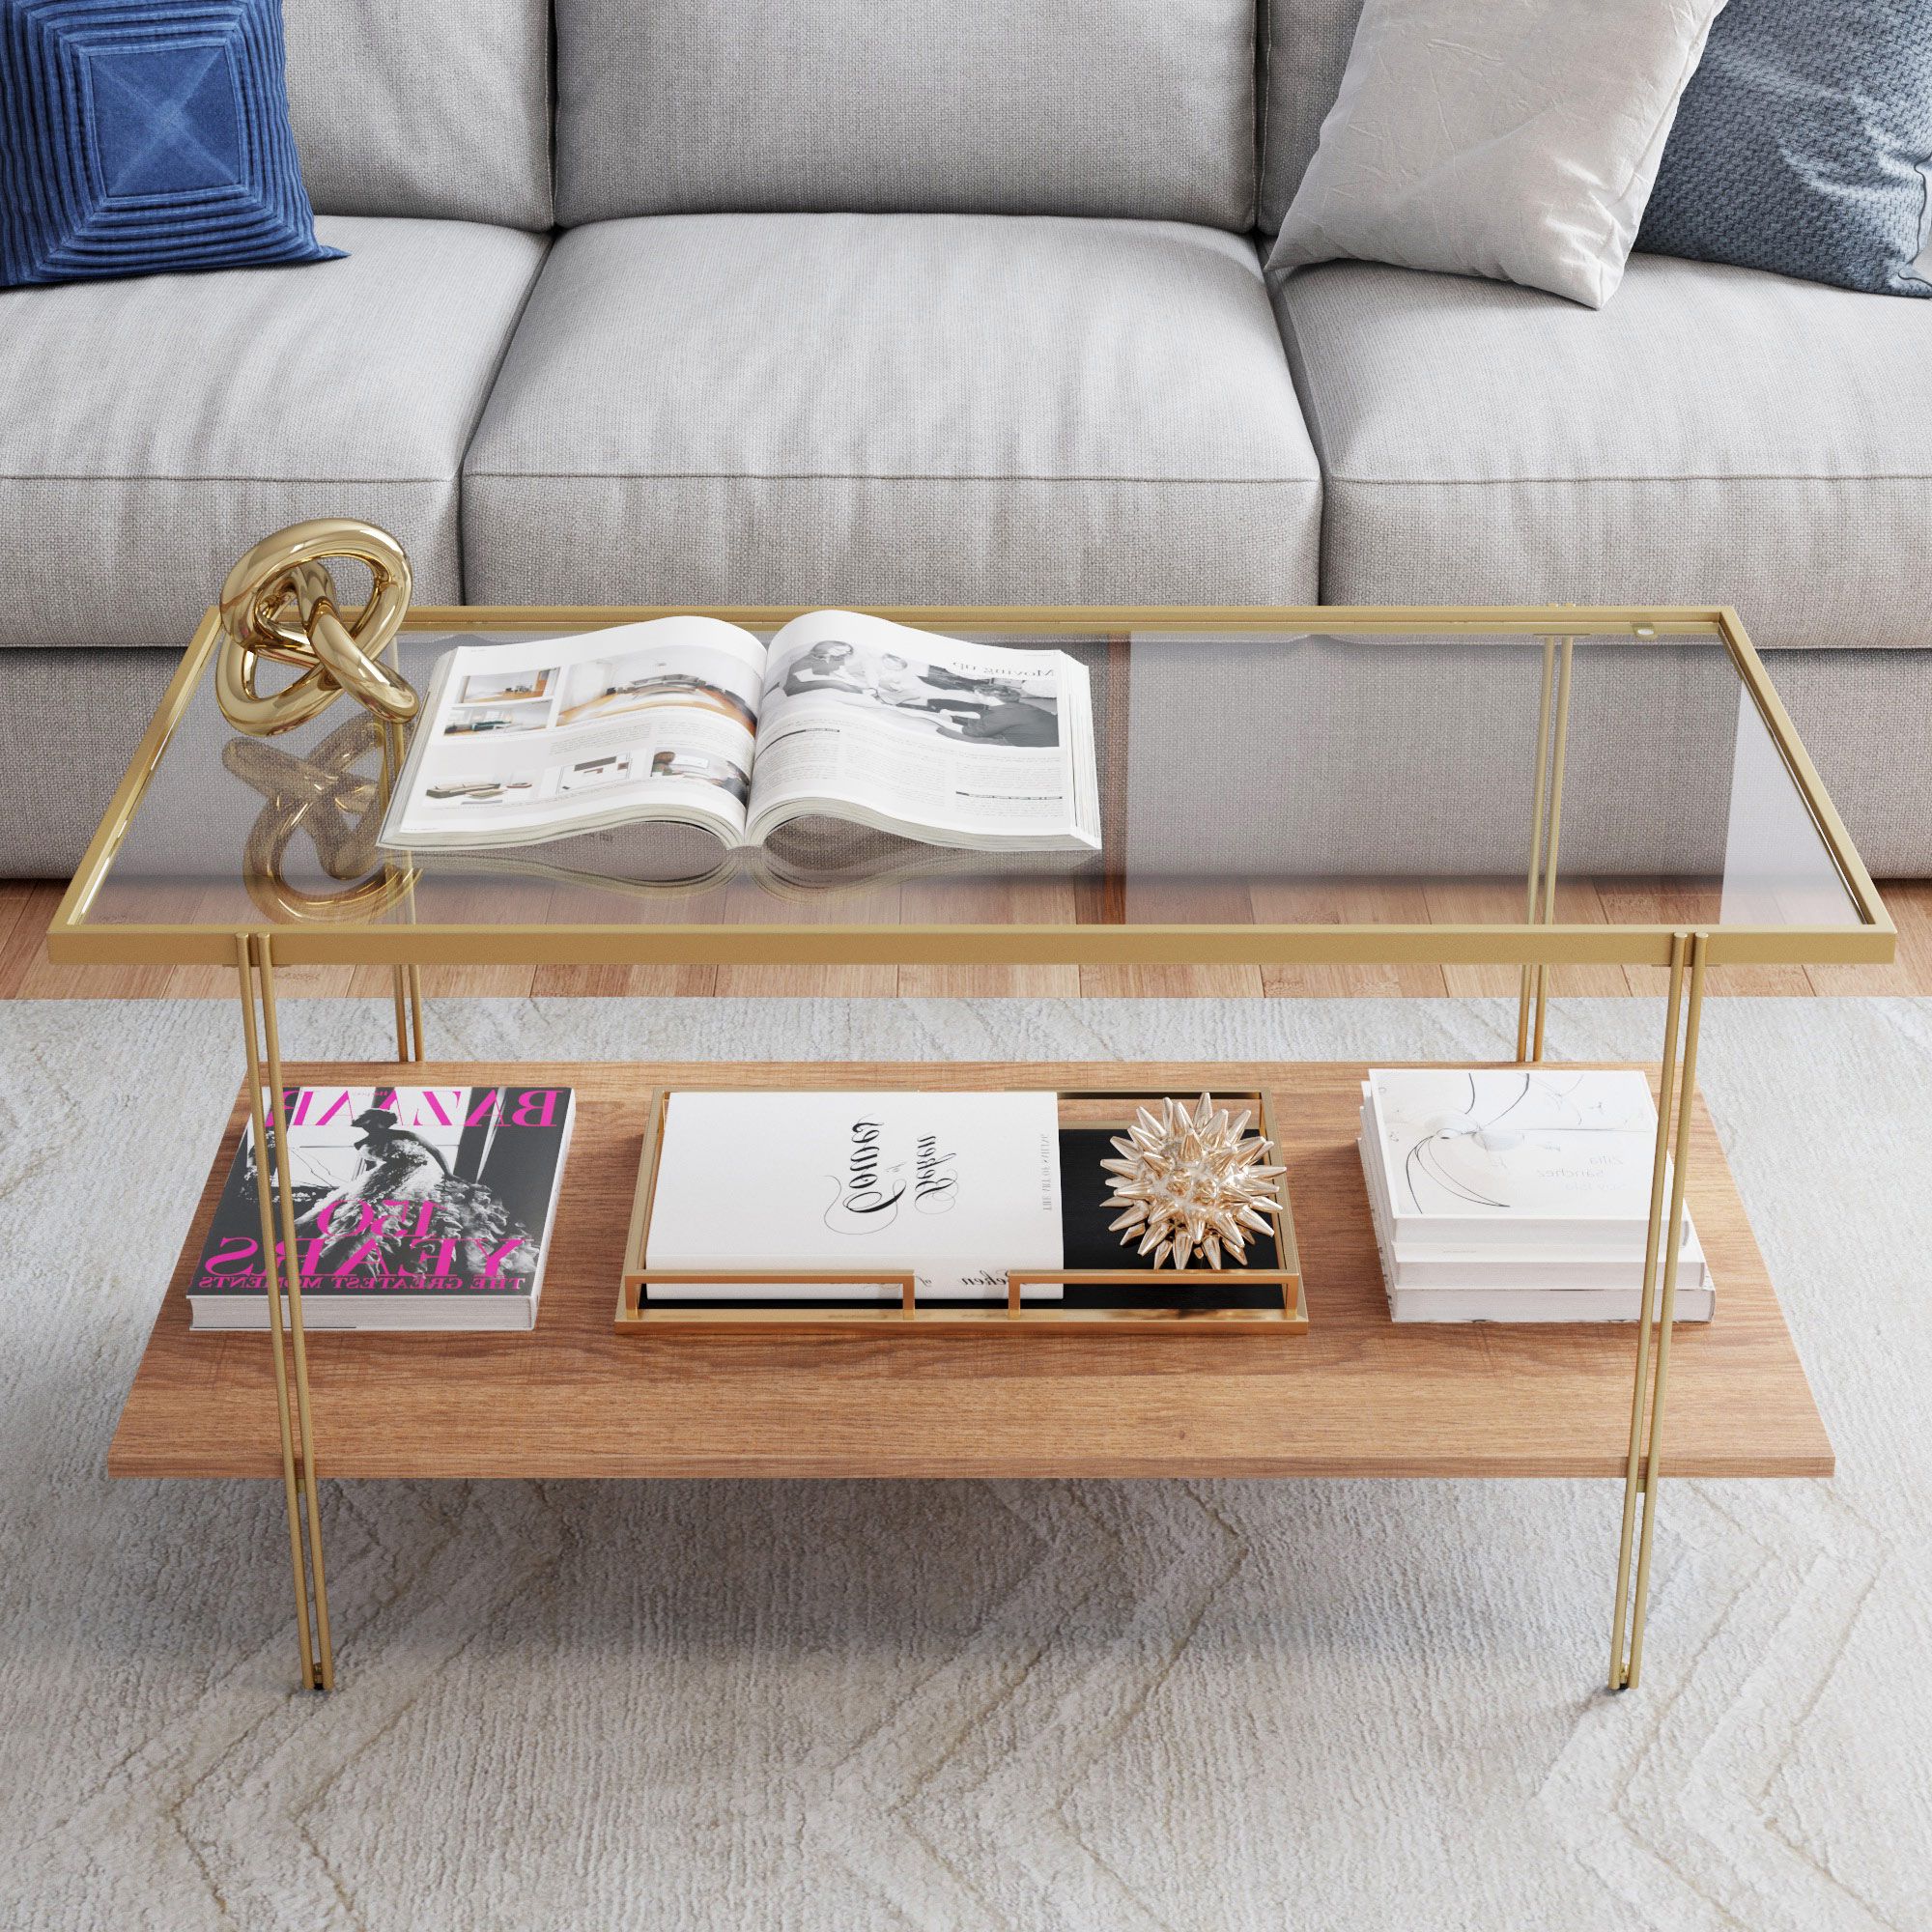 Rectangular Glass Top Coffee Tables Throughout Most Popular Nathan James Asher Mid Century Rectangle Gold Coffee Table With Glass (View 10 of 10)